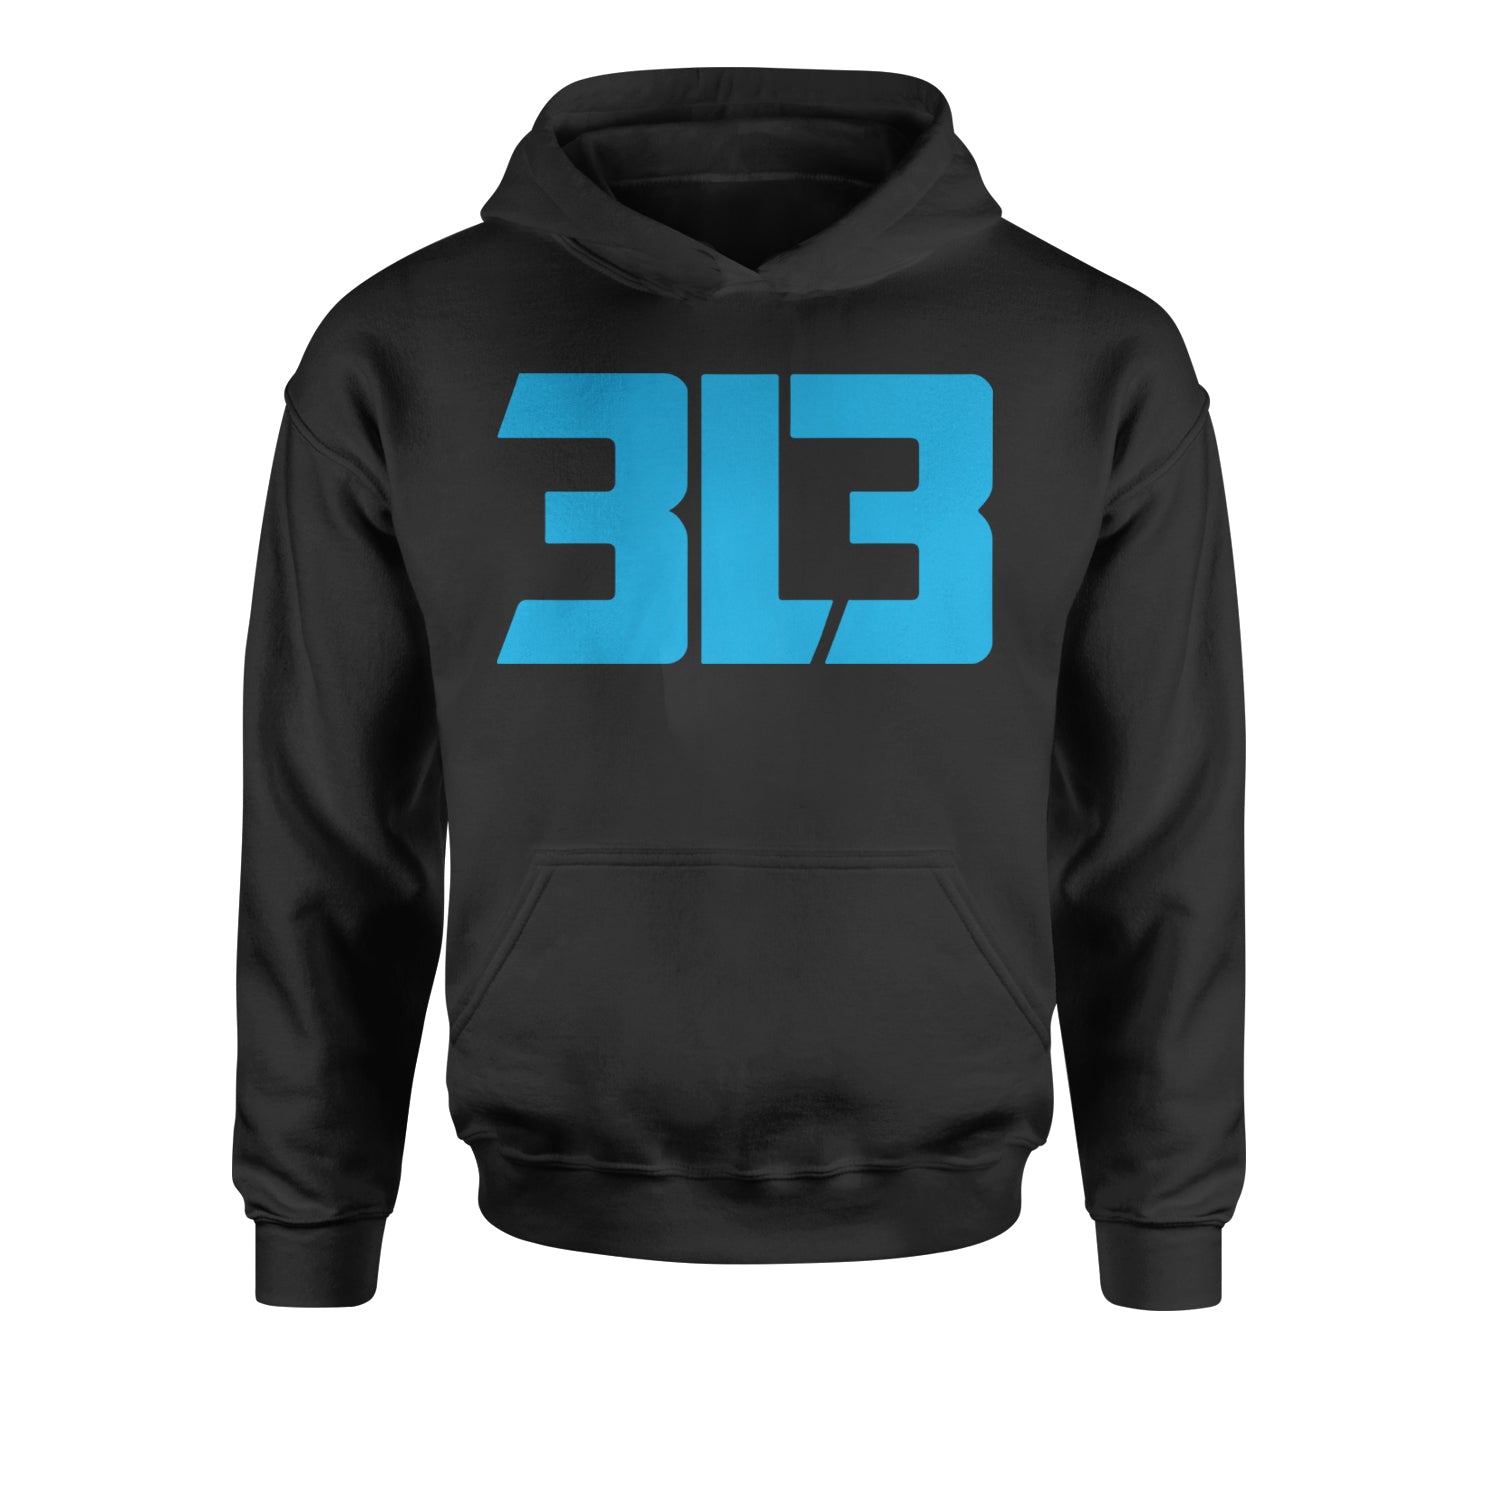 3L3 From The 313 Detroit Football Youth-Sized Hoodie